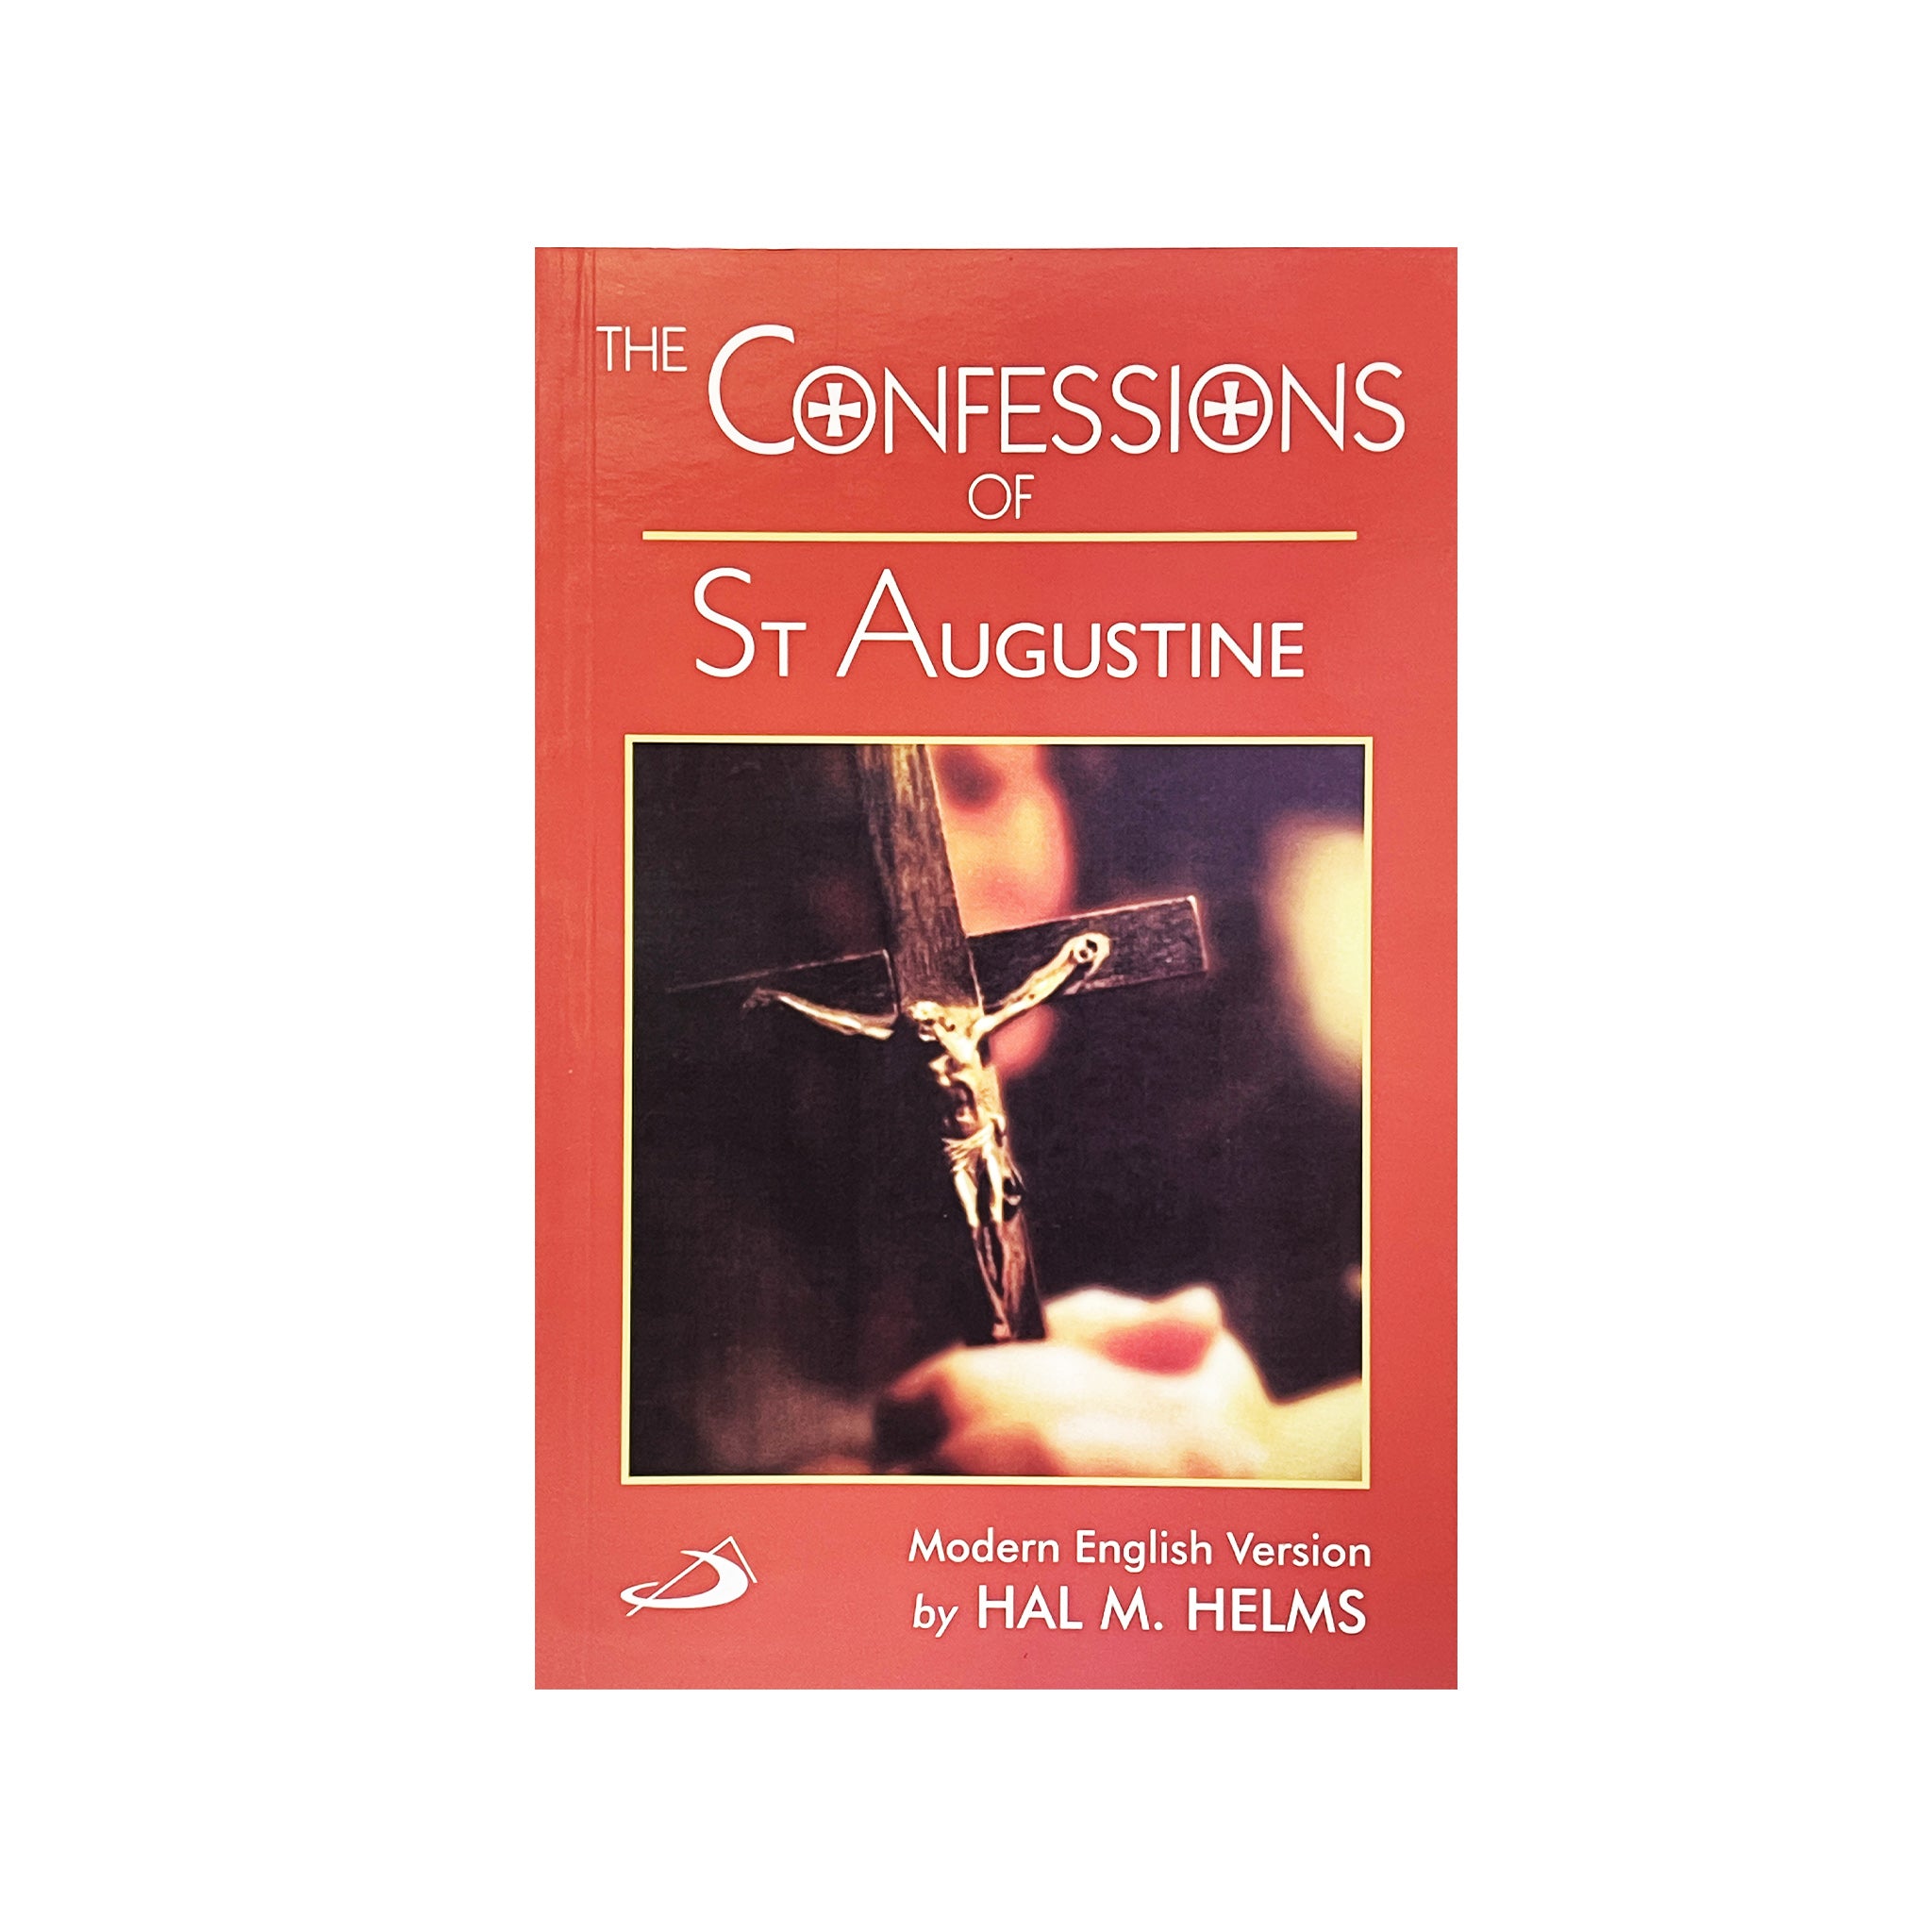 CONFESSIONS OF ST. AUGUSTINE by Hal M Helms